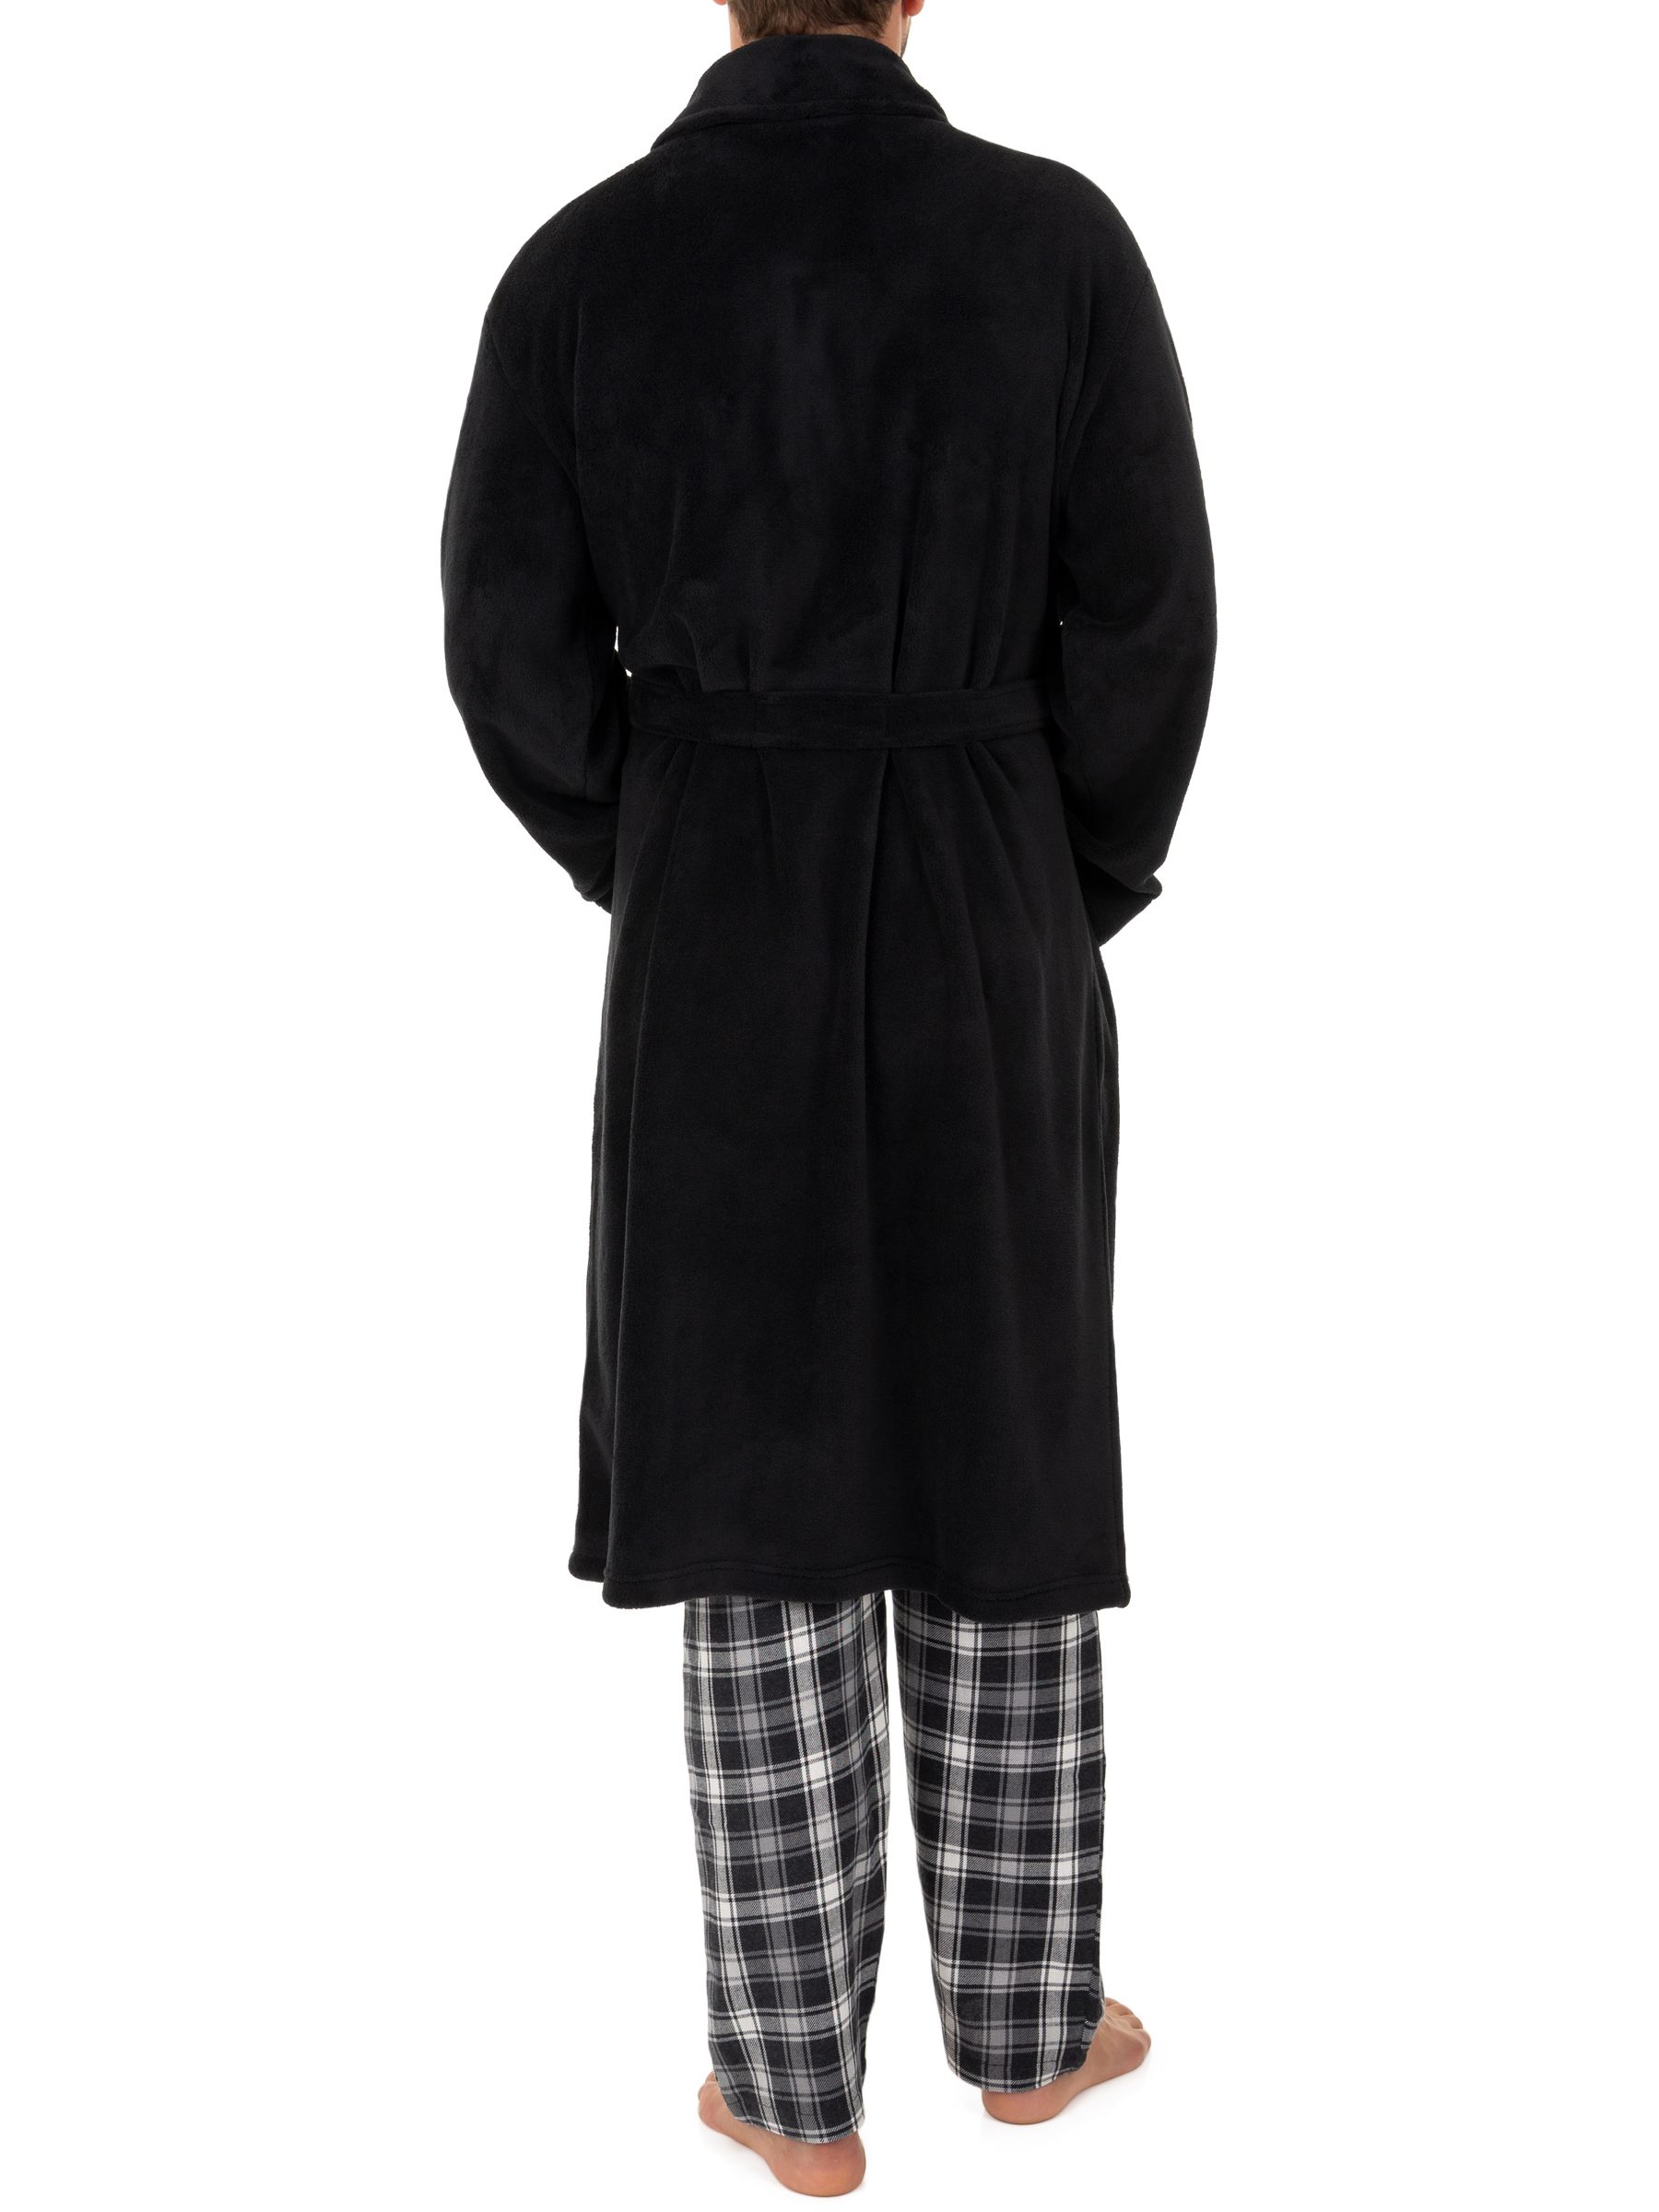 Fruit of the Loom Adult Mens Solid Plush Fleece Bathrobe One Size - image 2 of 4